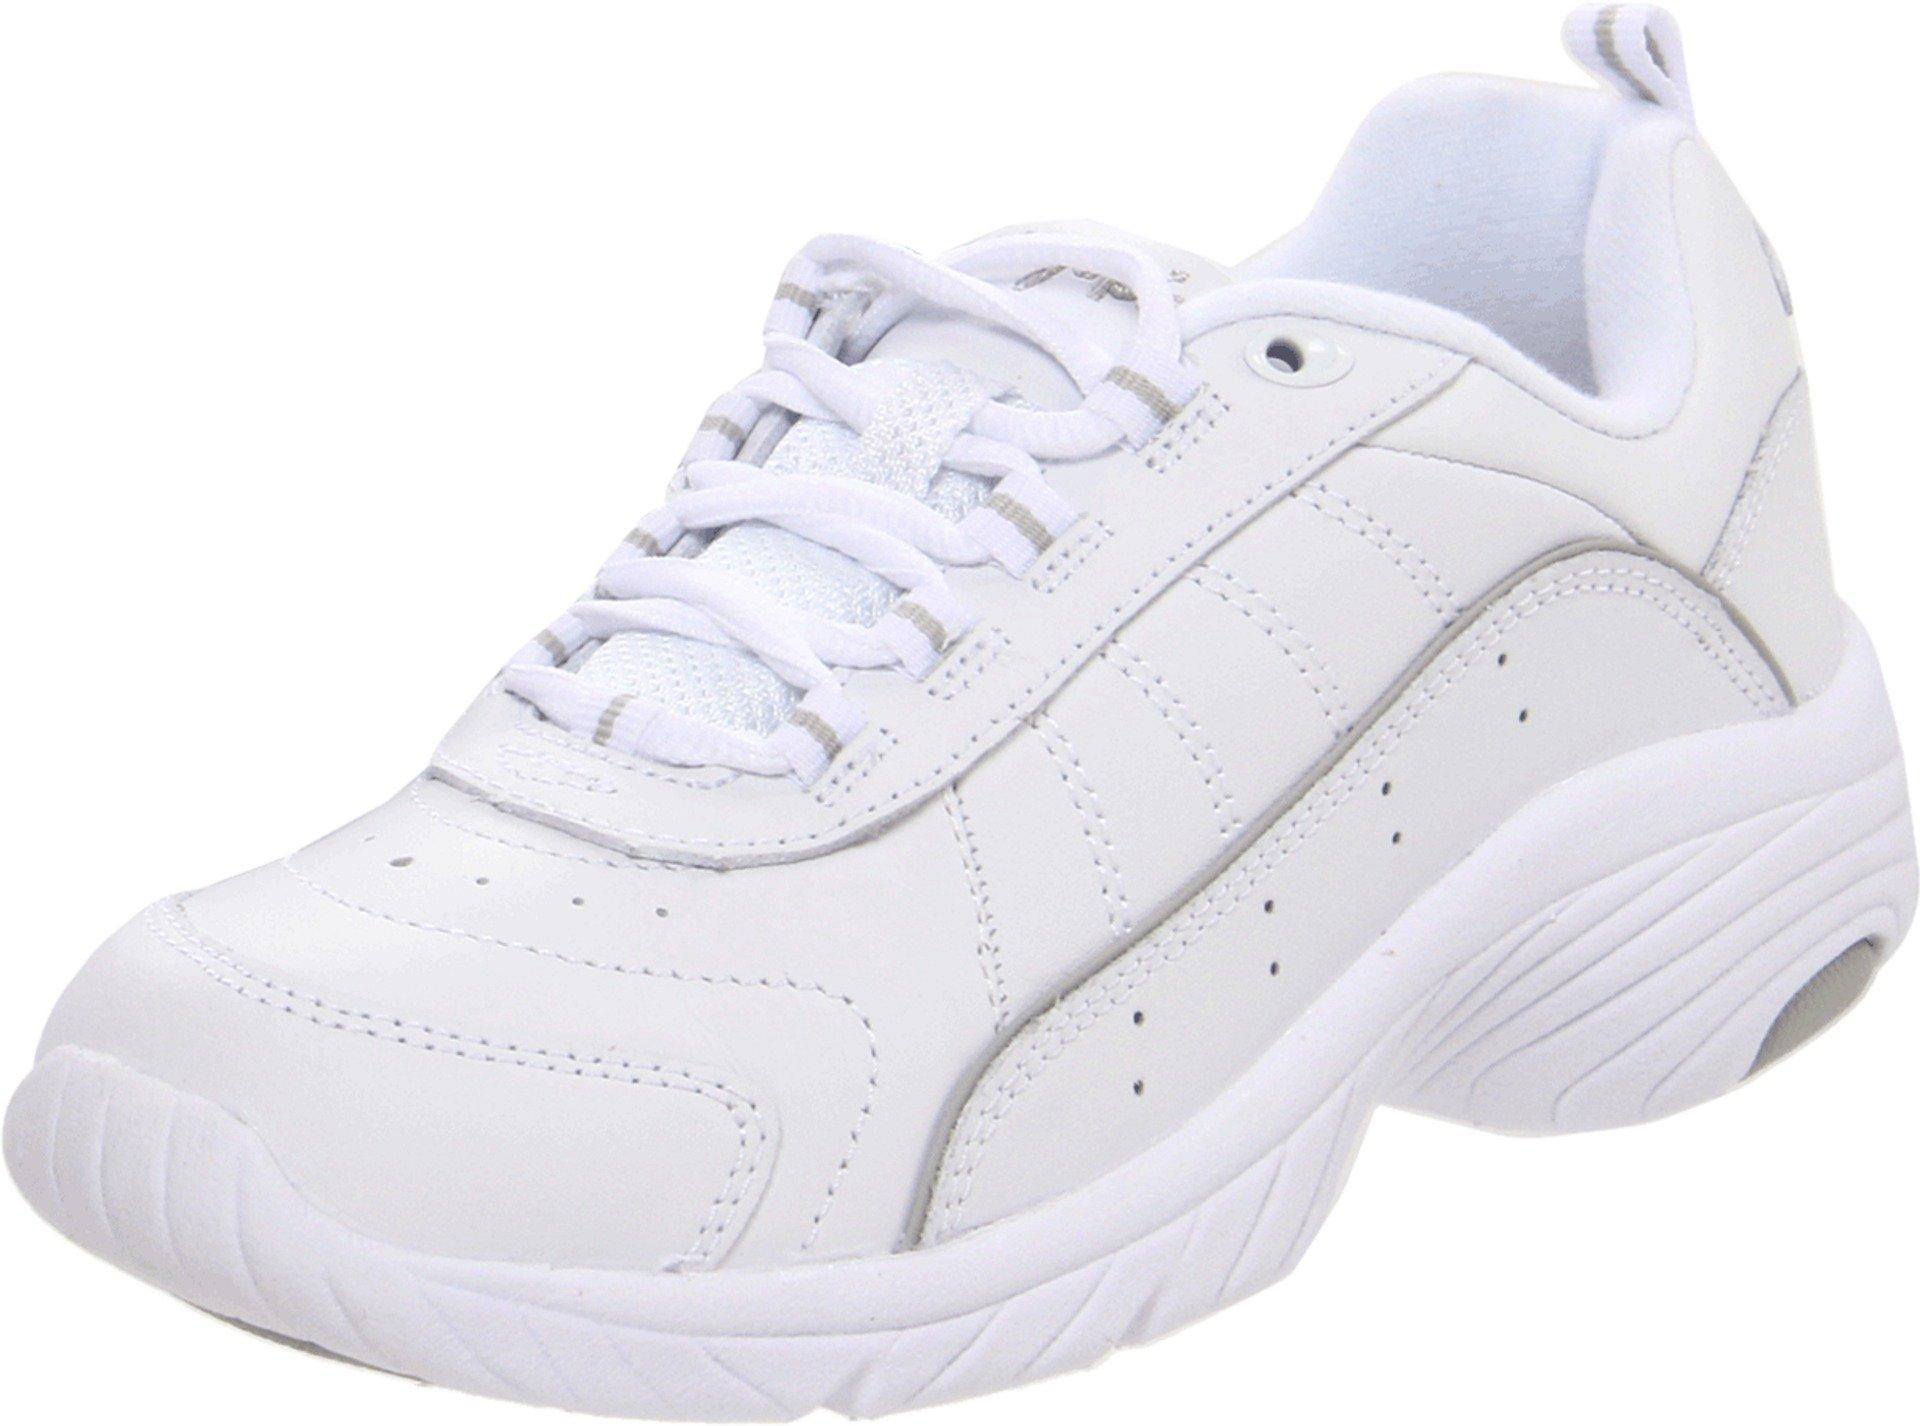 Easy Spirit Punter Sneakers in White - Save 35% - Lyst